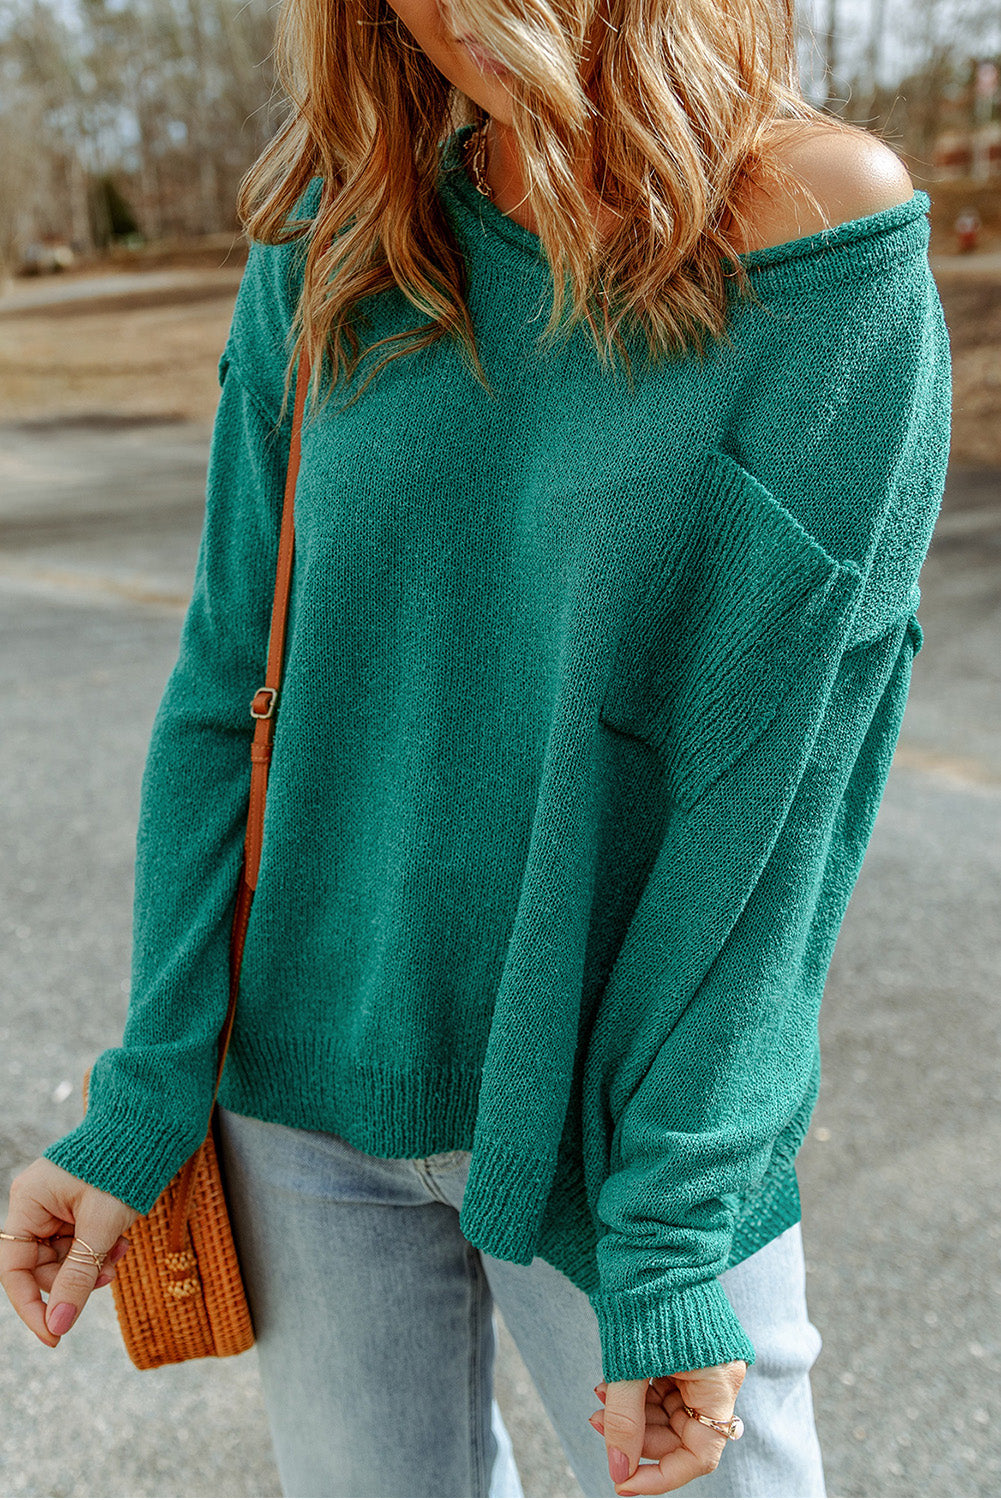 Green Solid Color Off Shoulder Rib Knit Sweater with Pocket